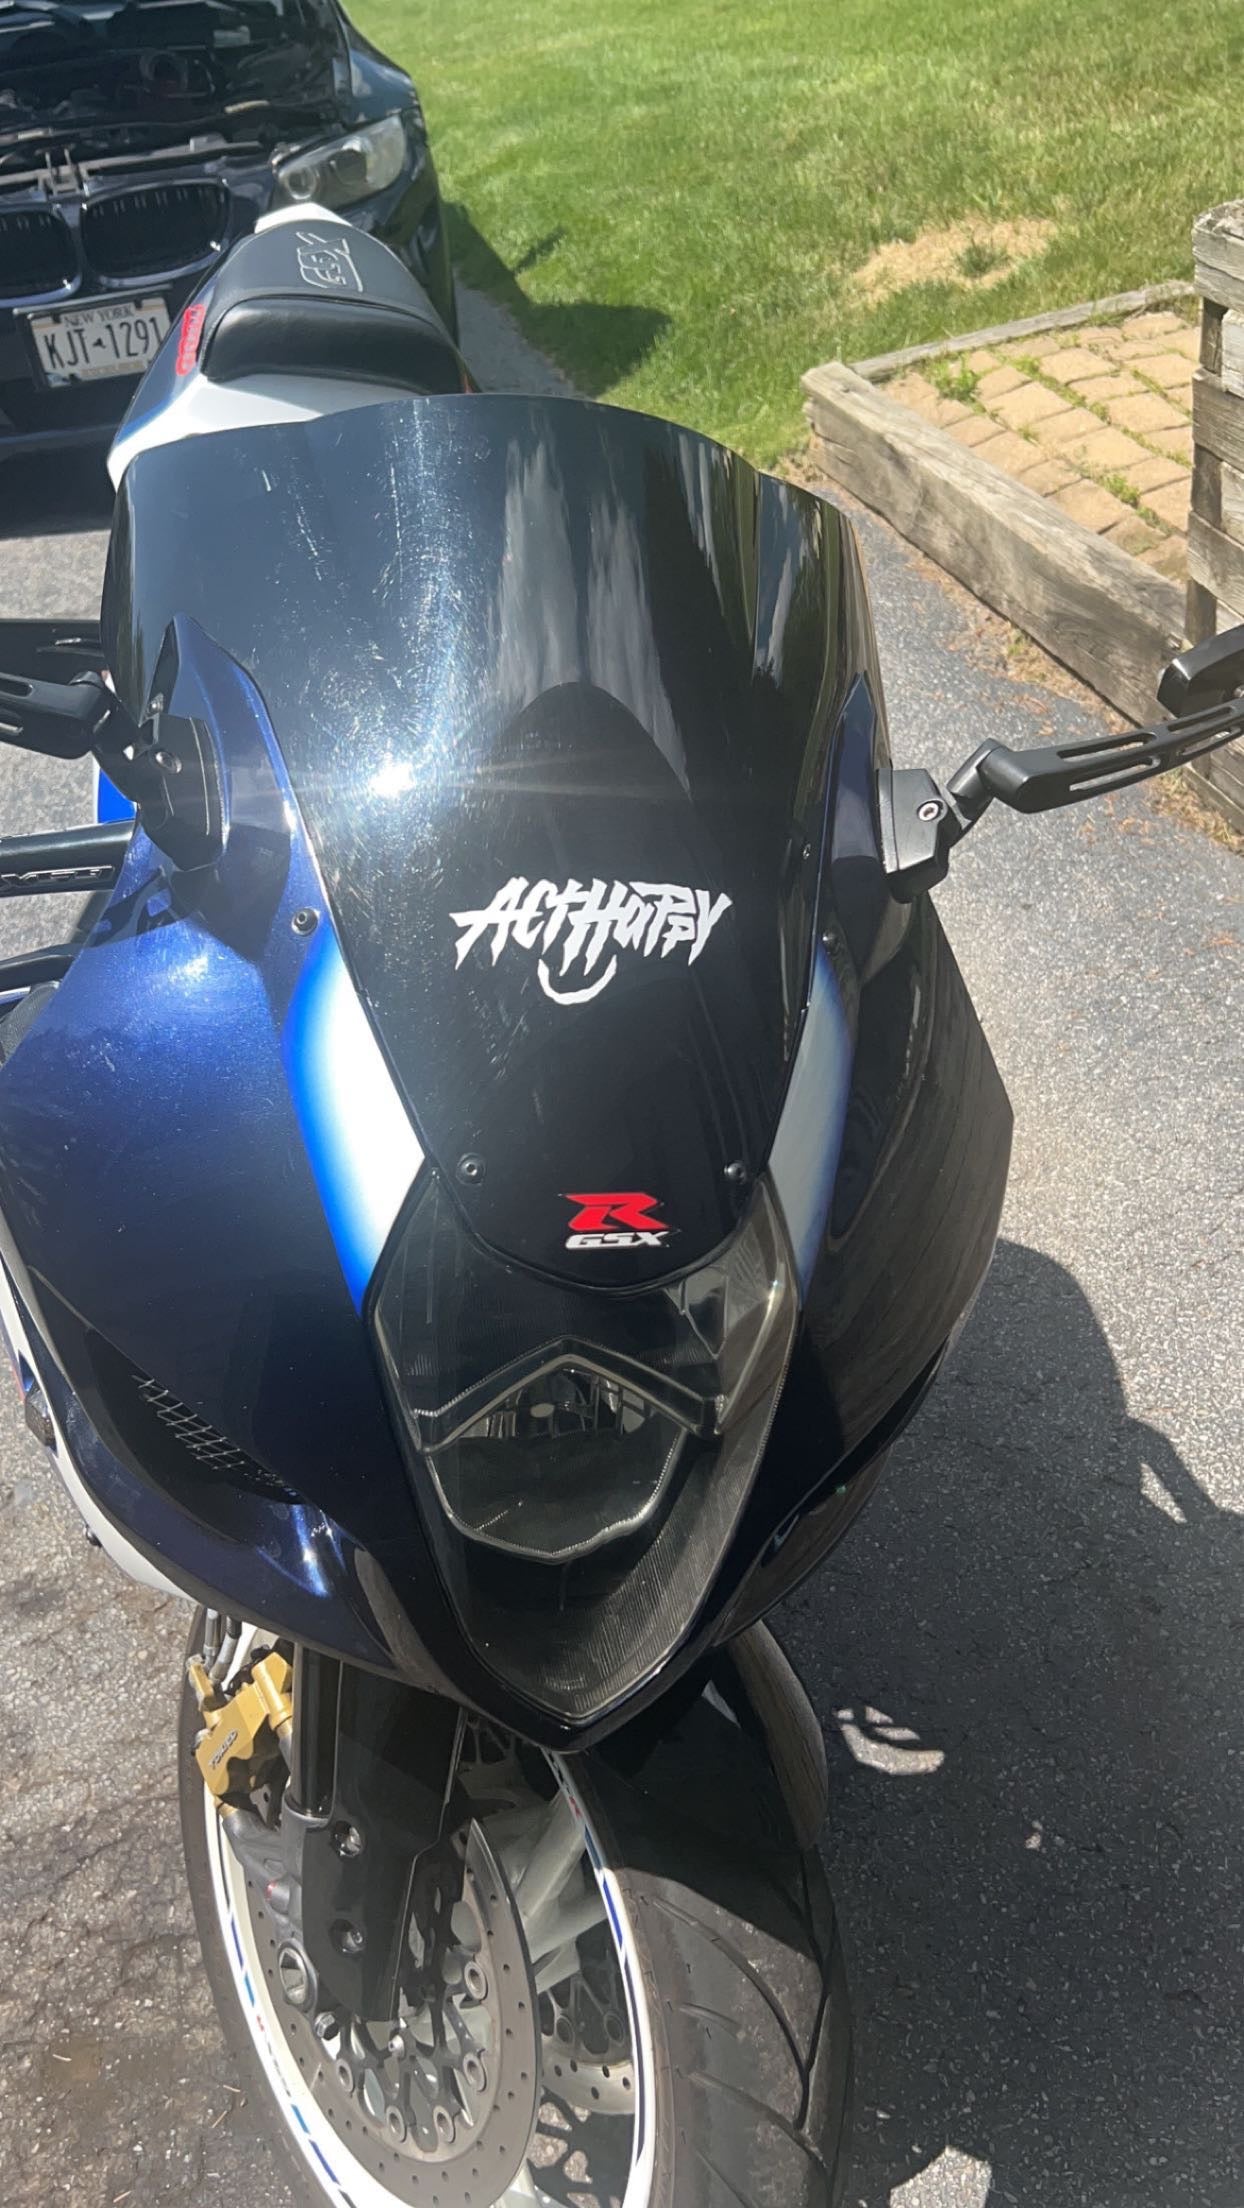 ActHappy 2.0 v1 Decal